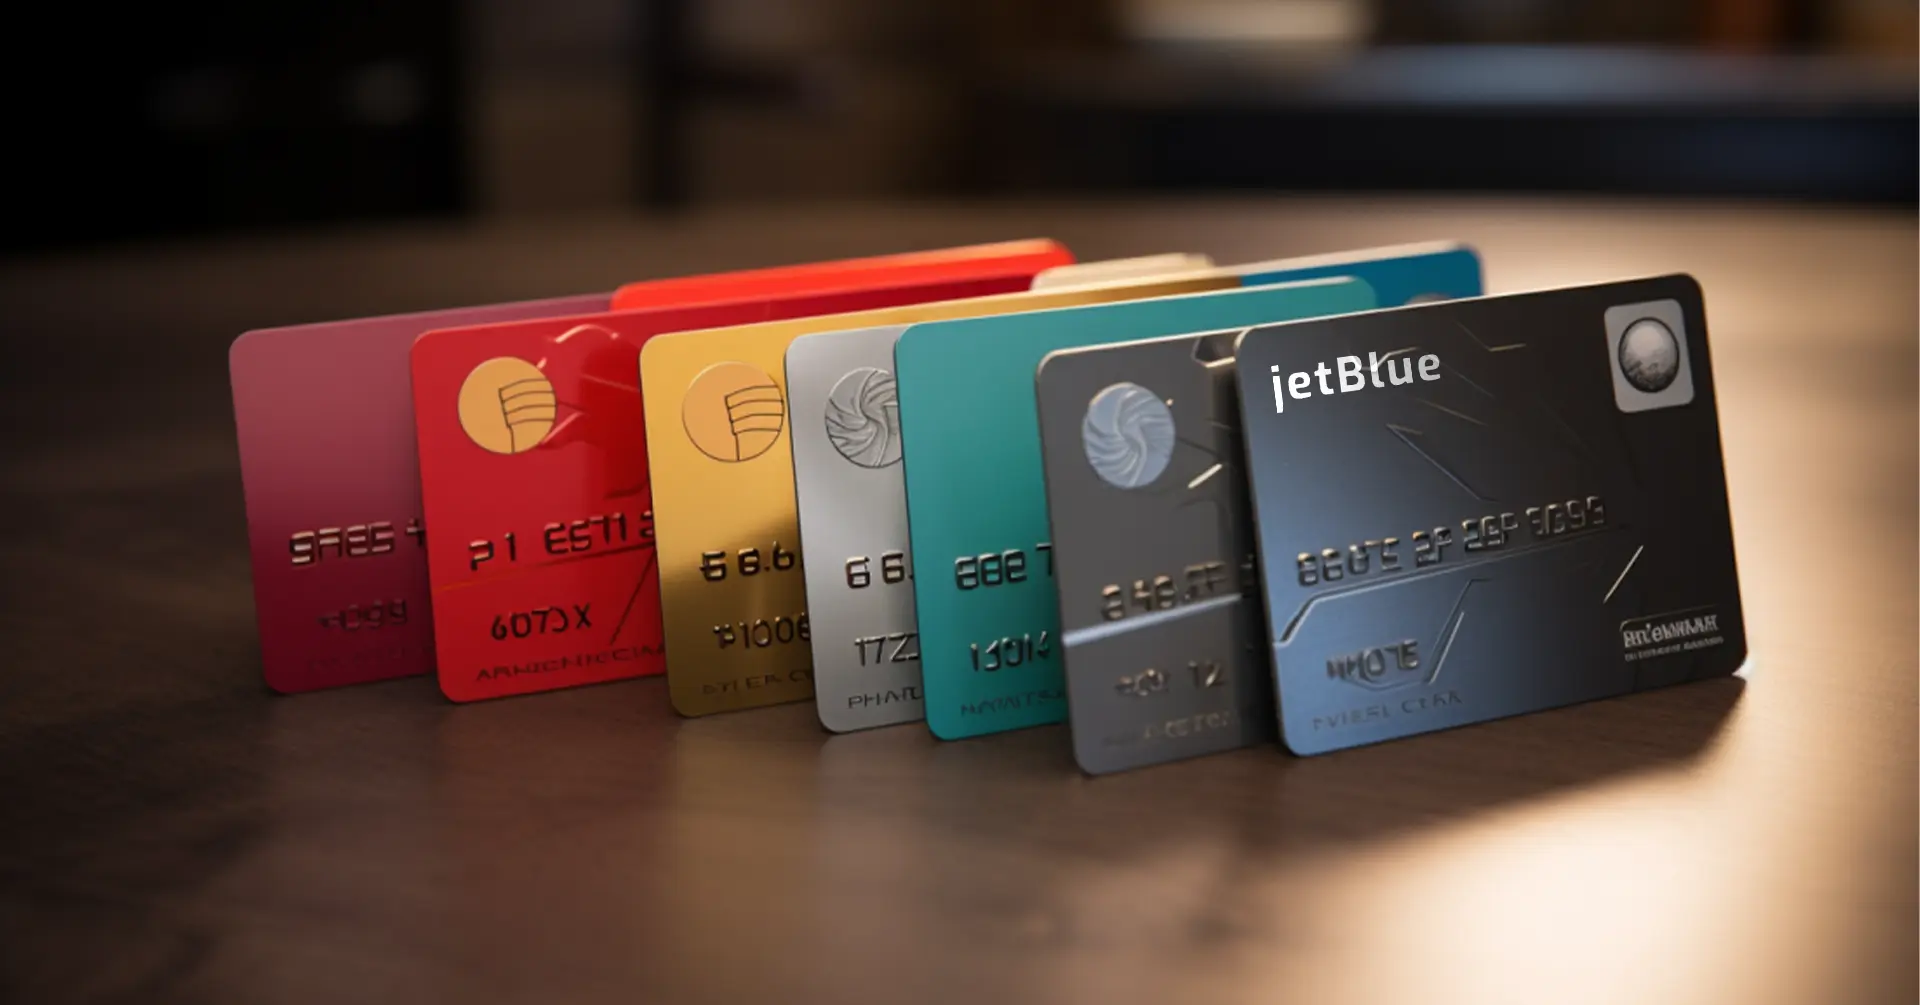 Jetbluemastercard.come/Activate: Step-by-Step Instructions